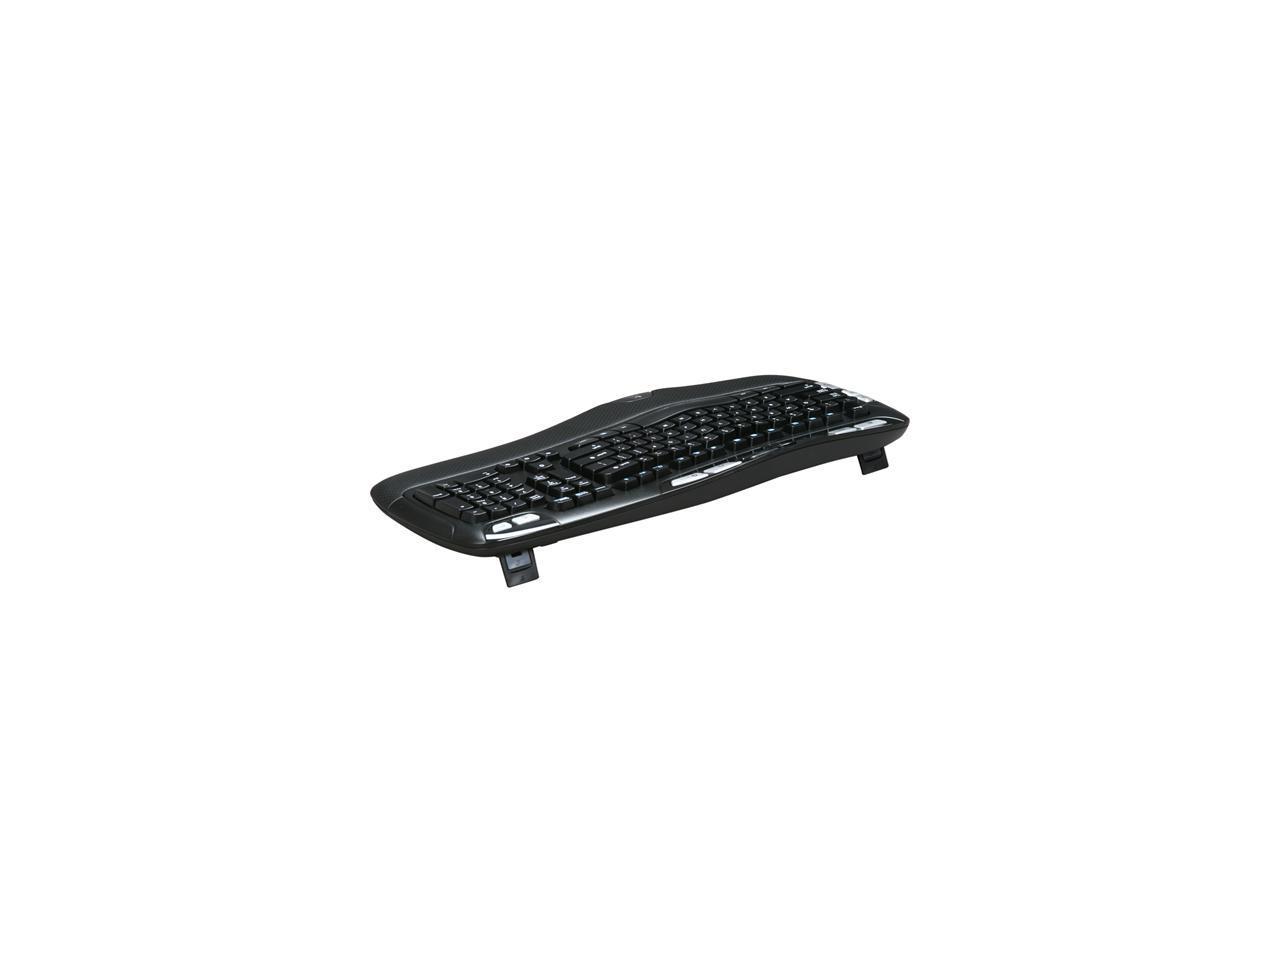 Logitech MK550 2.4 GHz Wireless Wave Keyboard and Mouse Combo - Black